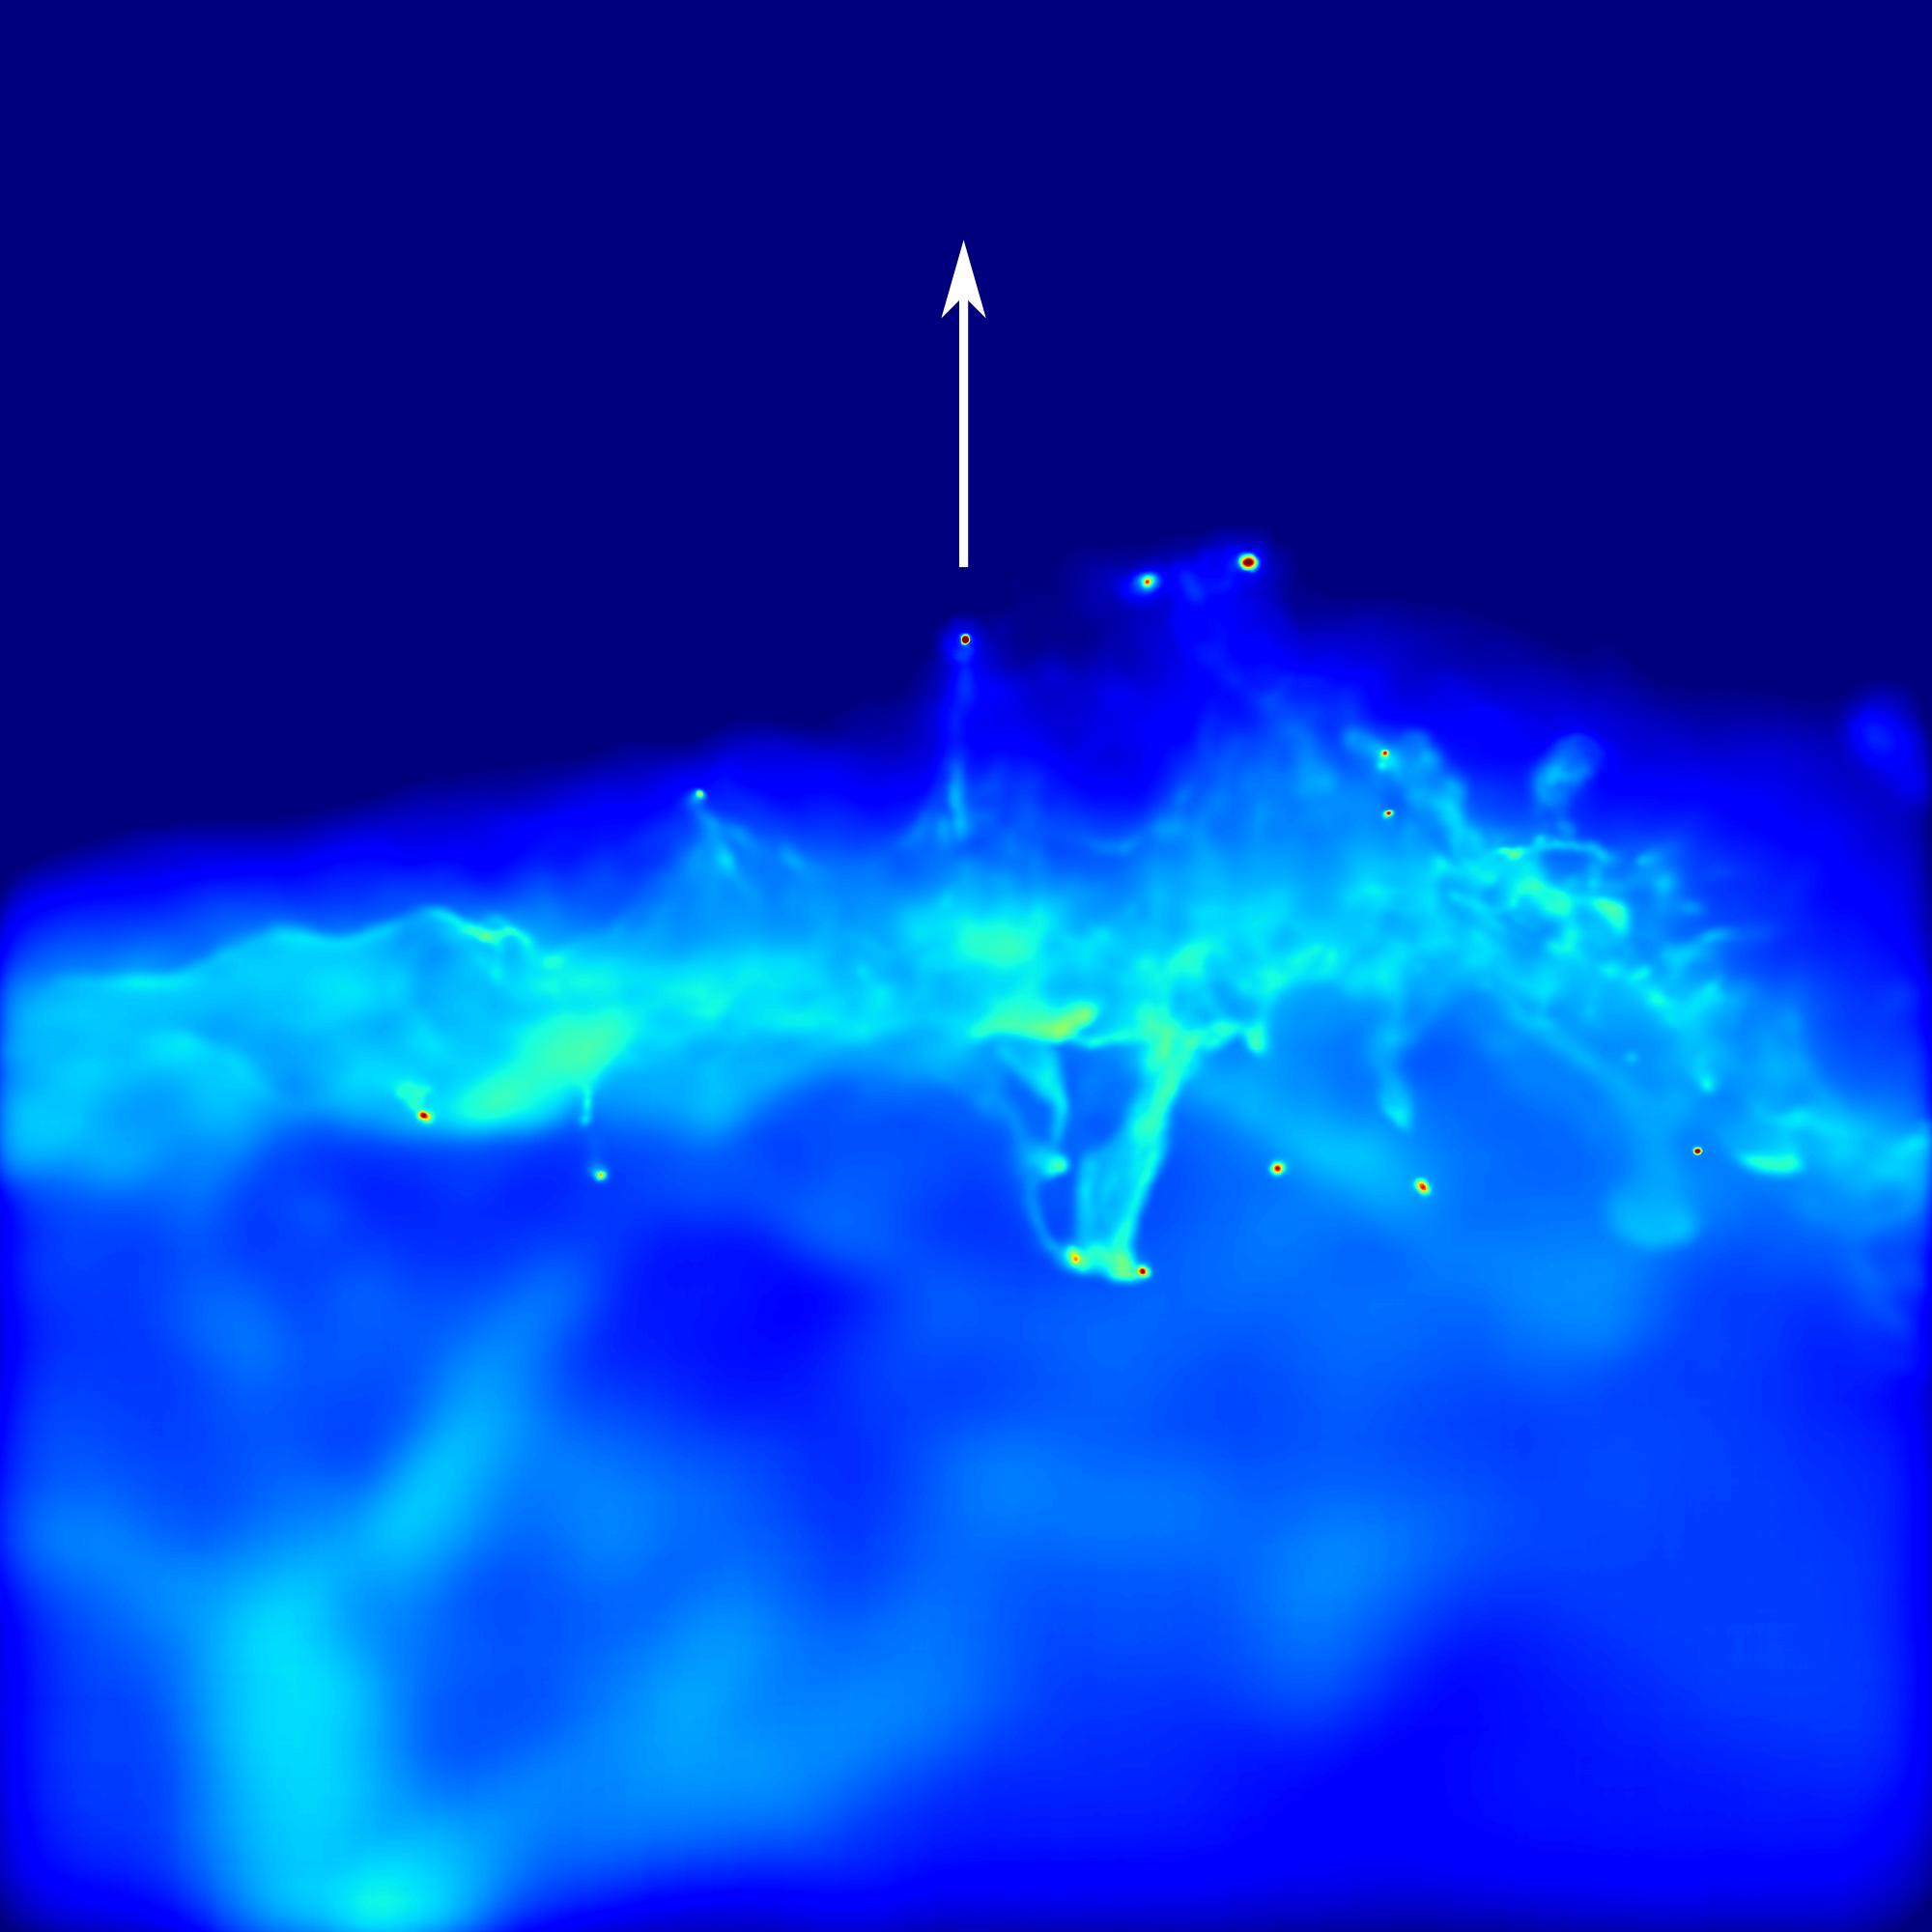 Computer-Simulation des Cosmic Web Stripping